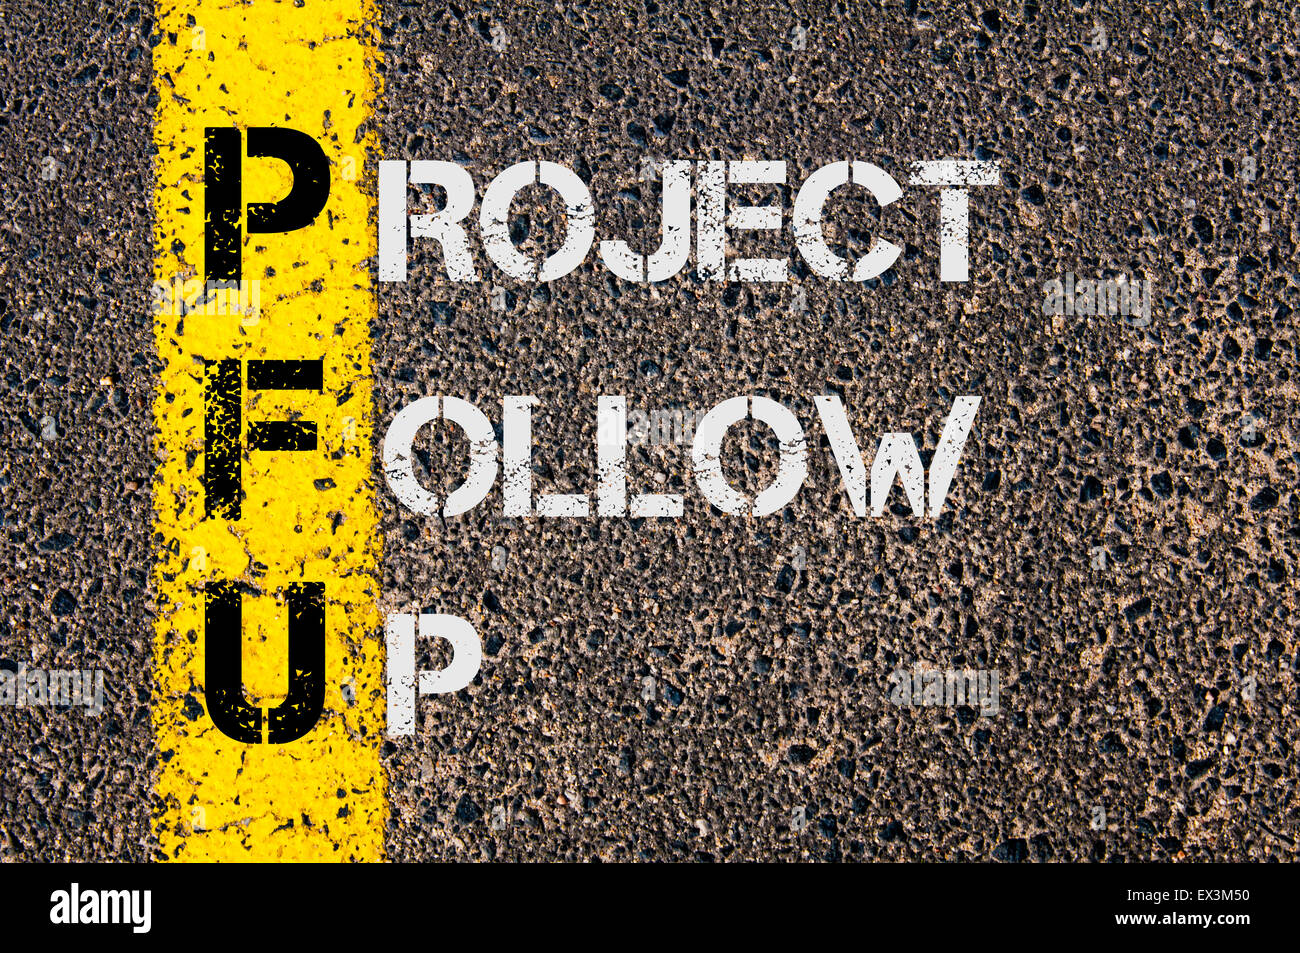 Concept image of Business Acronym PFU as Project Follow Up written over road marking yellow painted line. Stock Photo